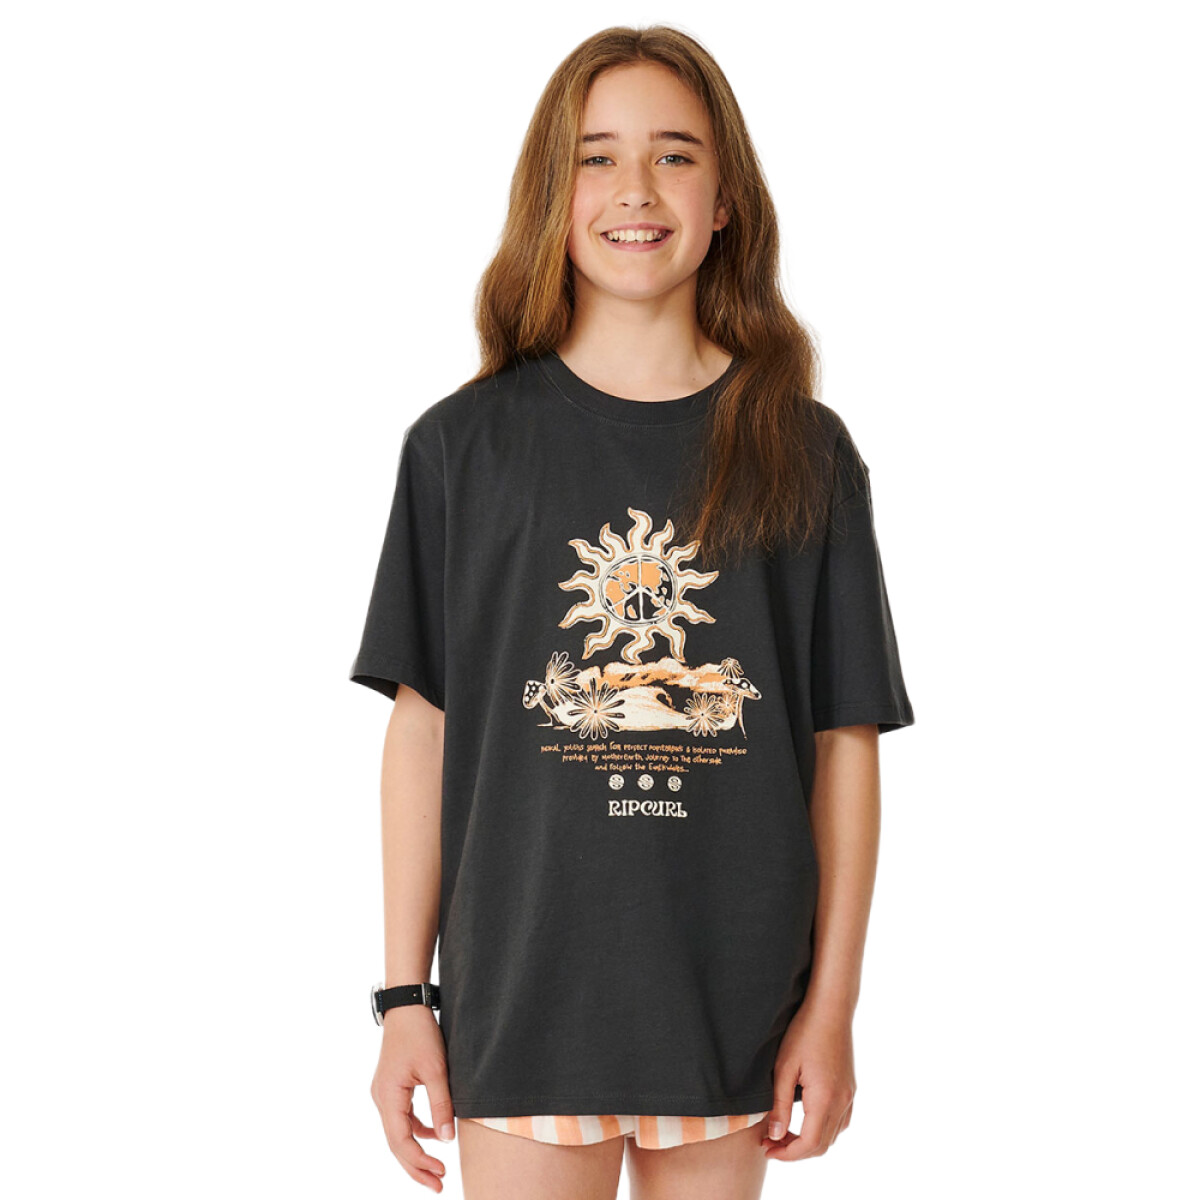 Remera Rip Curl Earth Waves 